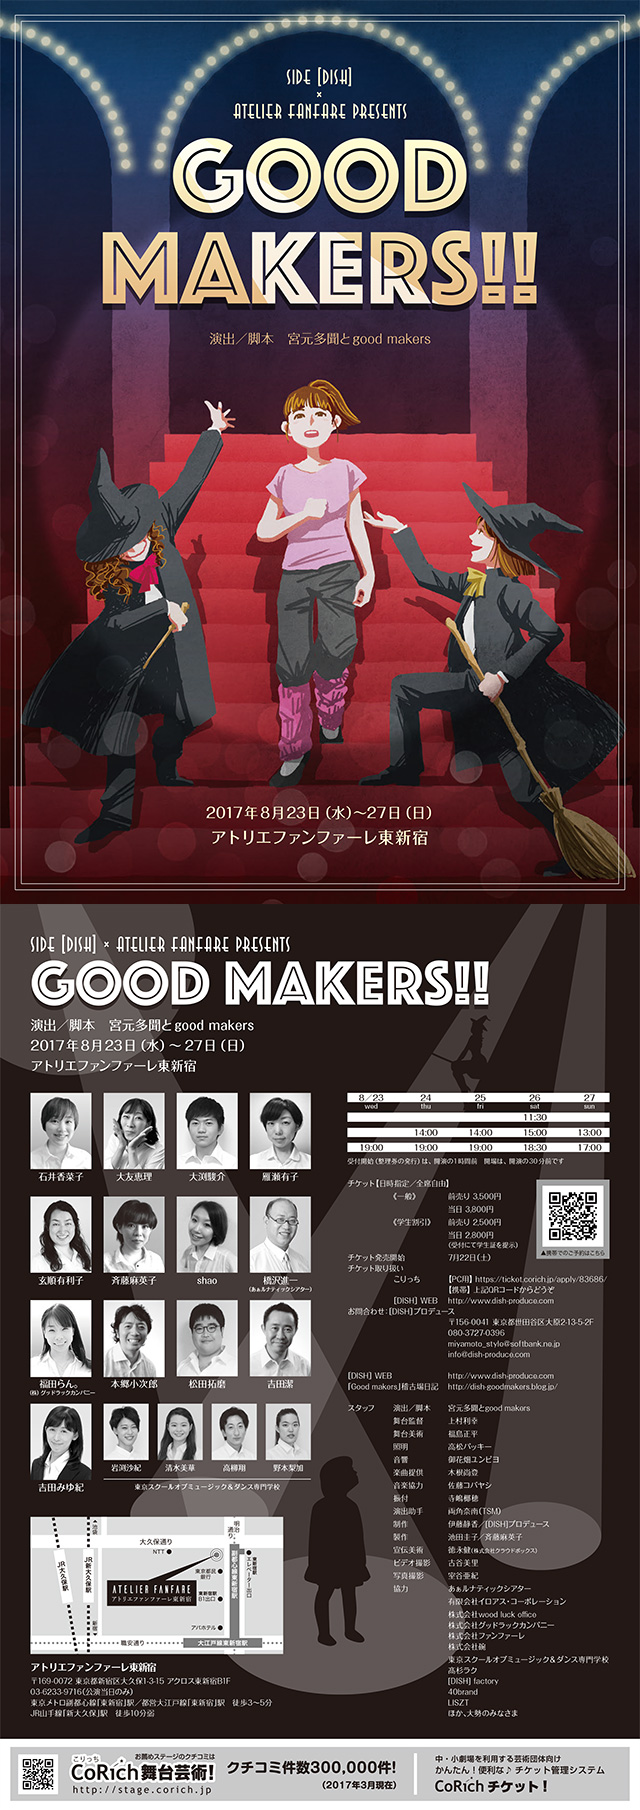 Good Makers!!